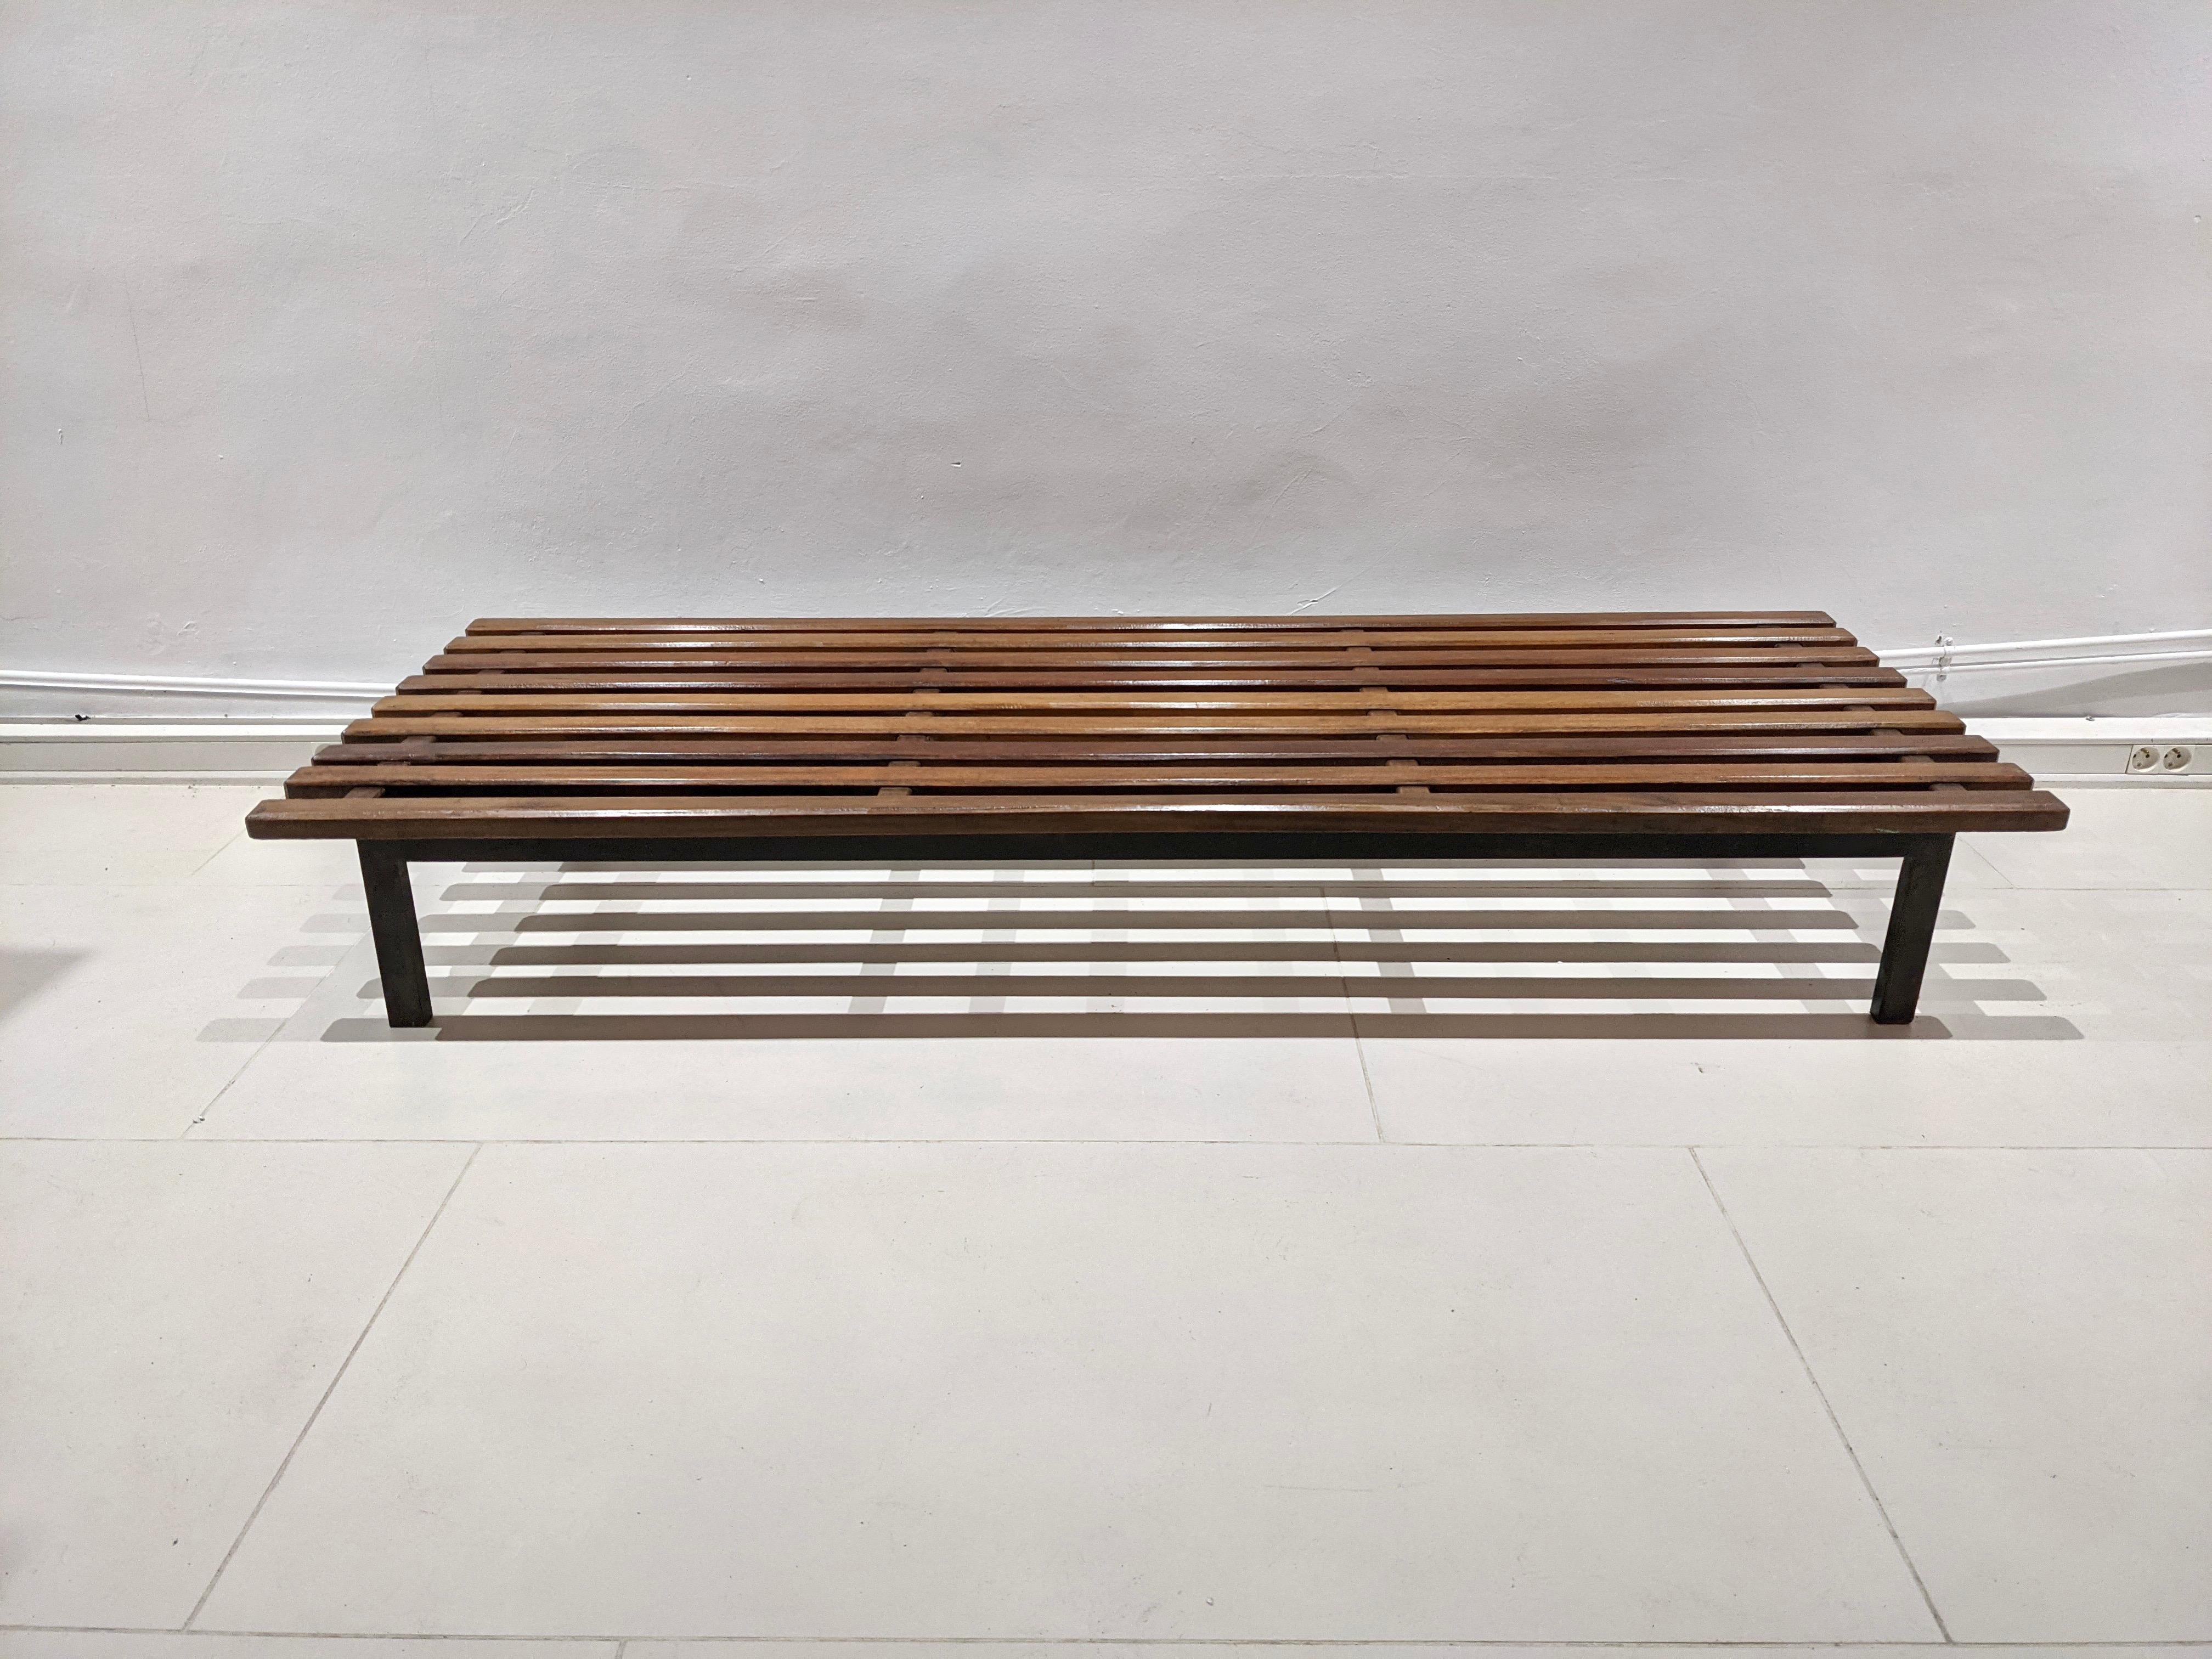 Vintage Cansado mahogany bench by Charlotte Perriand. Year 1954. Steph Simon edition. Very good condition.
Origin : Mining town of Cansado, Mauritania, Africa.